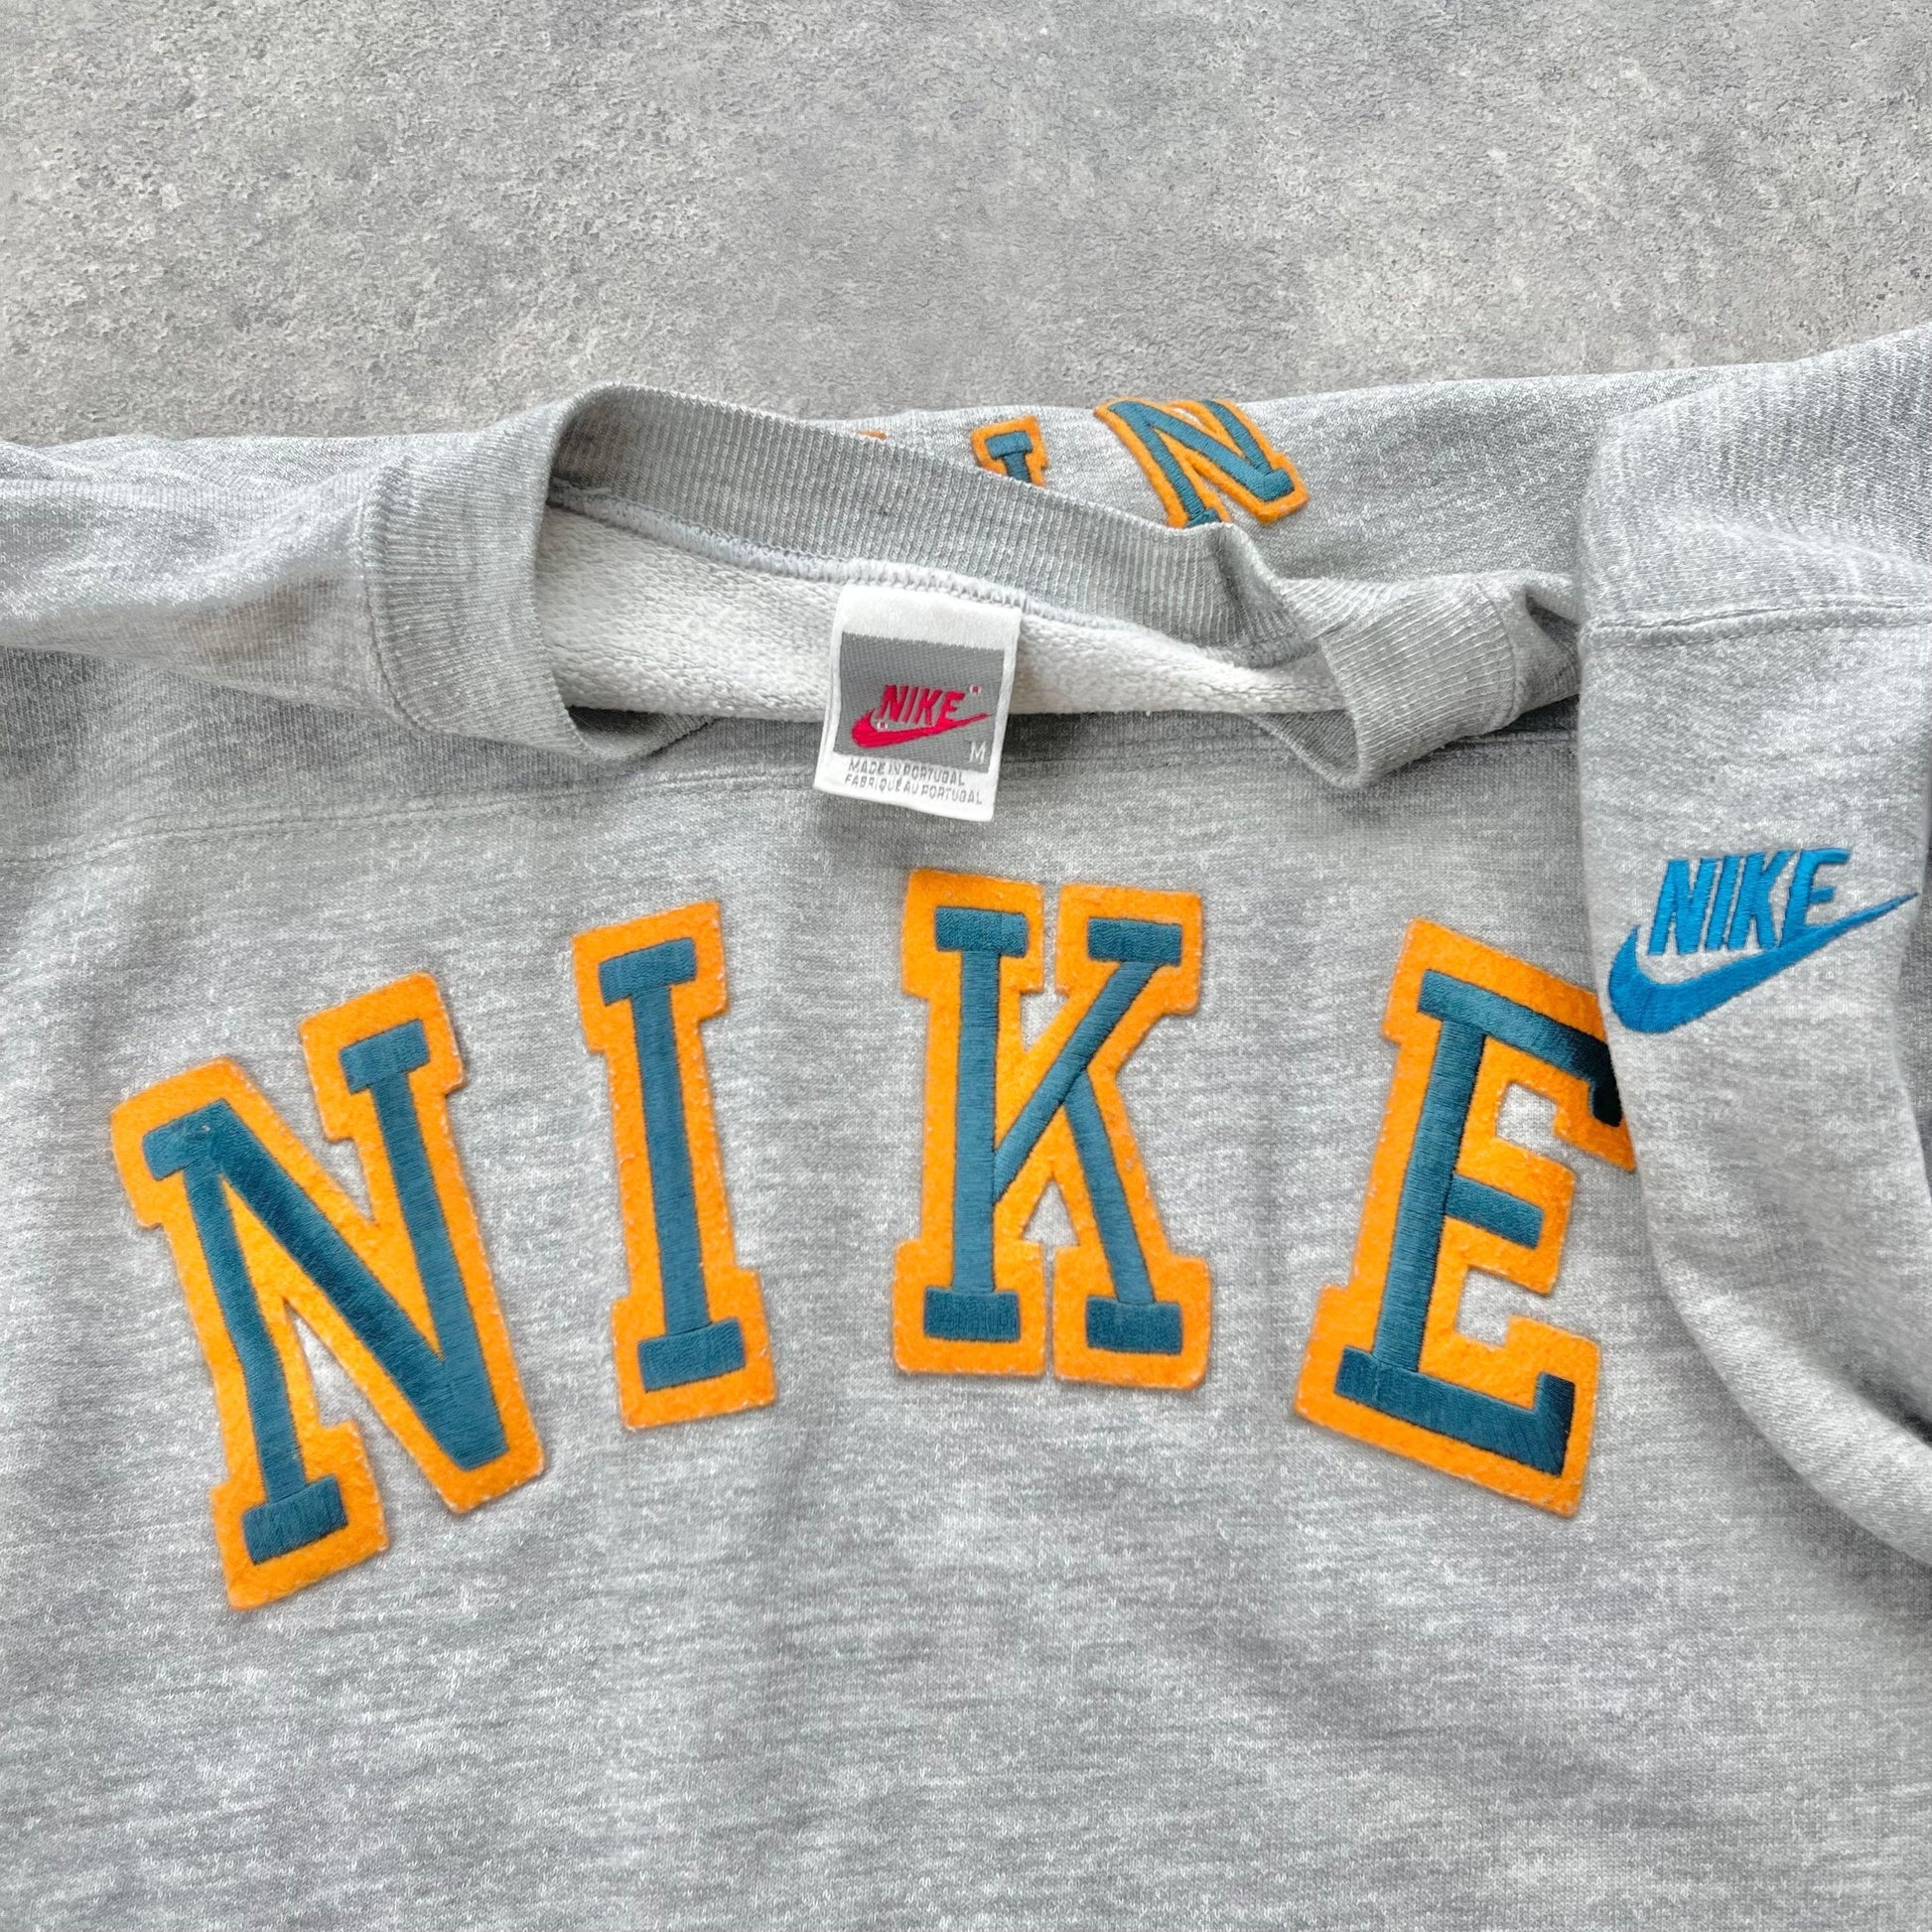 Nike 1980s embroidered heavyweight sweatshirt (M) - Known Source